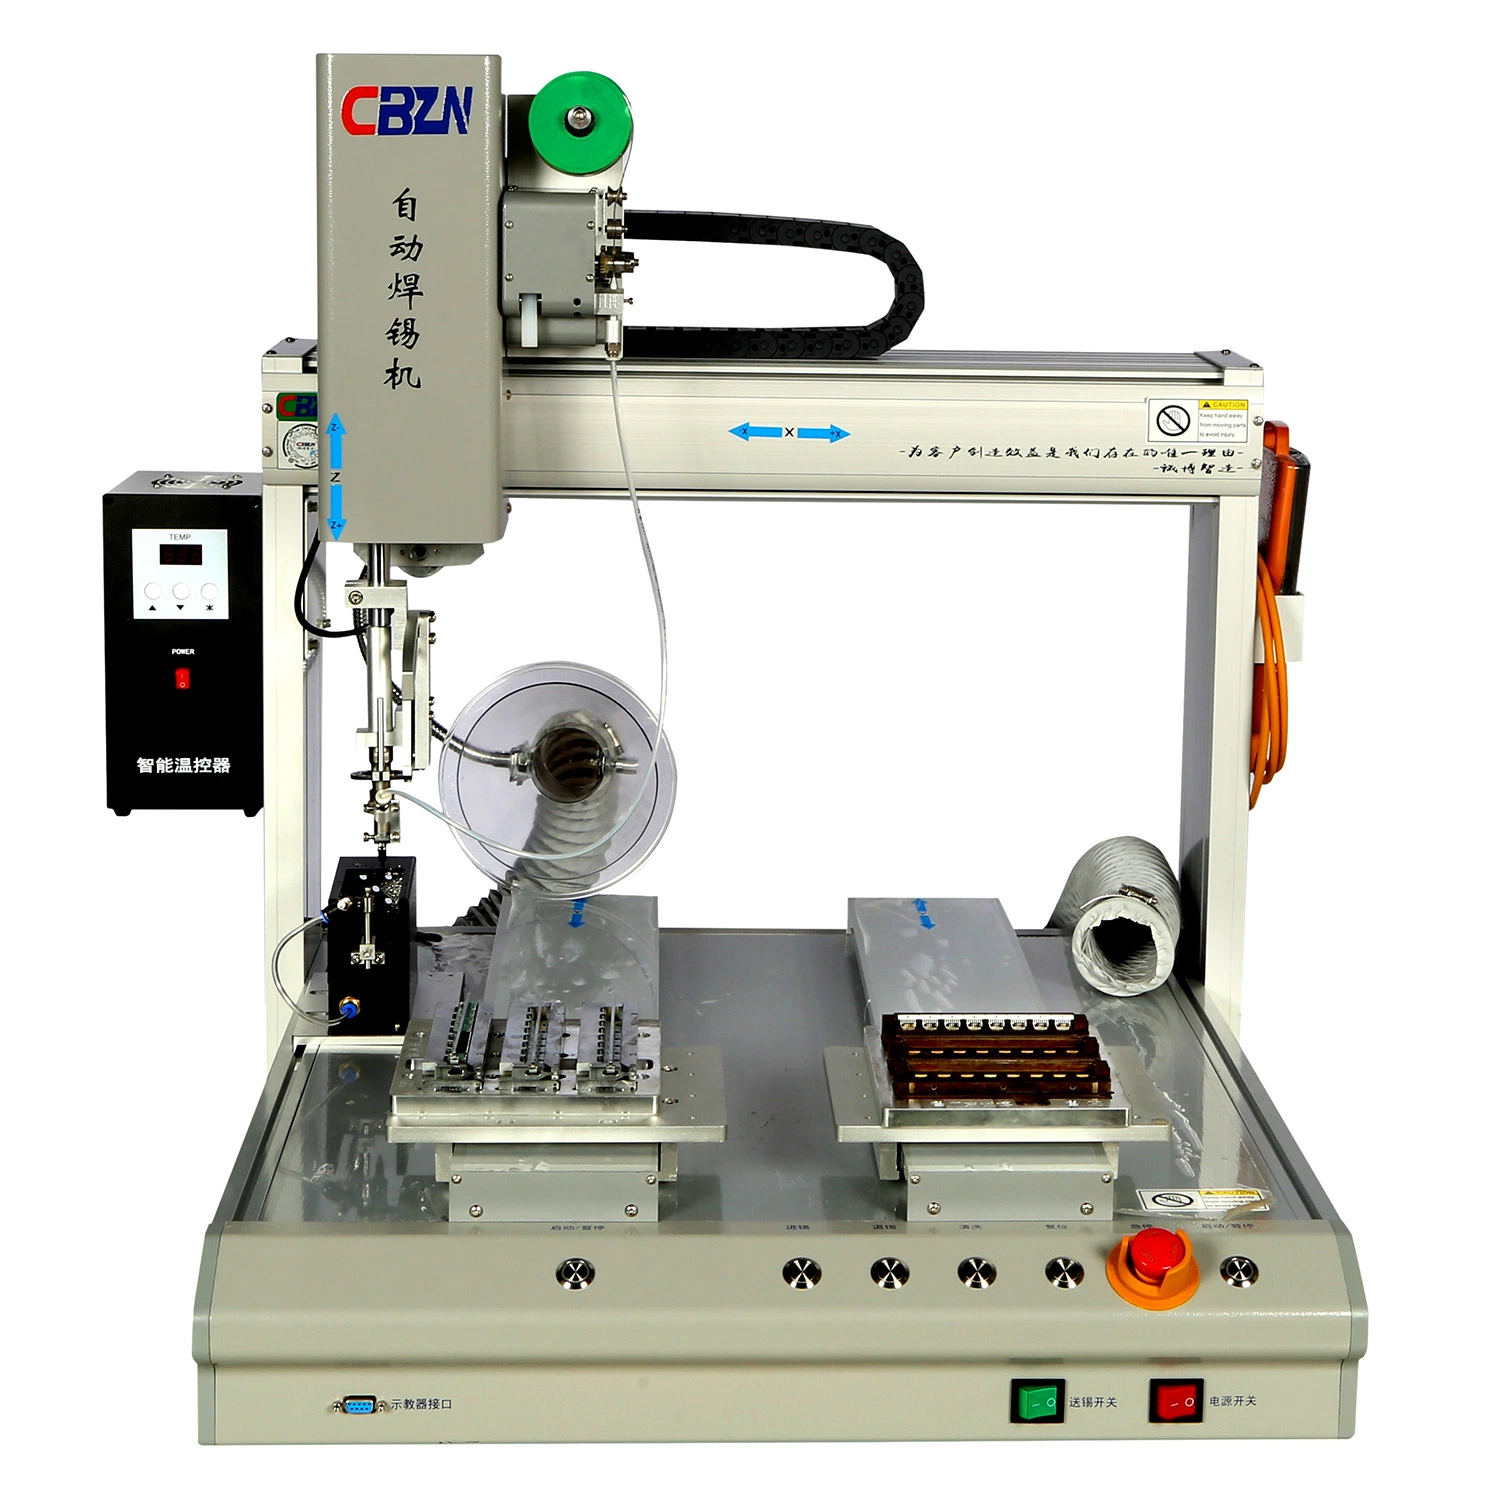 Ra Electric Fully Automatic Spot Soldering/Welding Iron Gun/Robot/Equipment/Machine for PCB Assembly Production Line